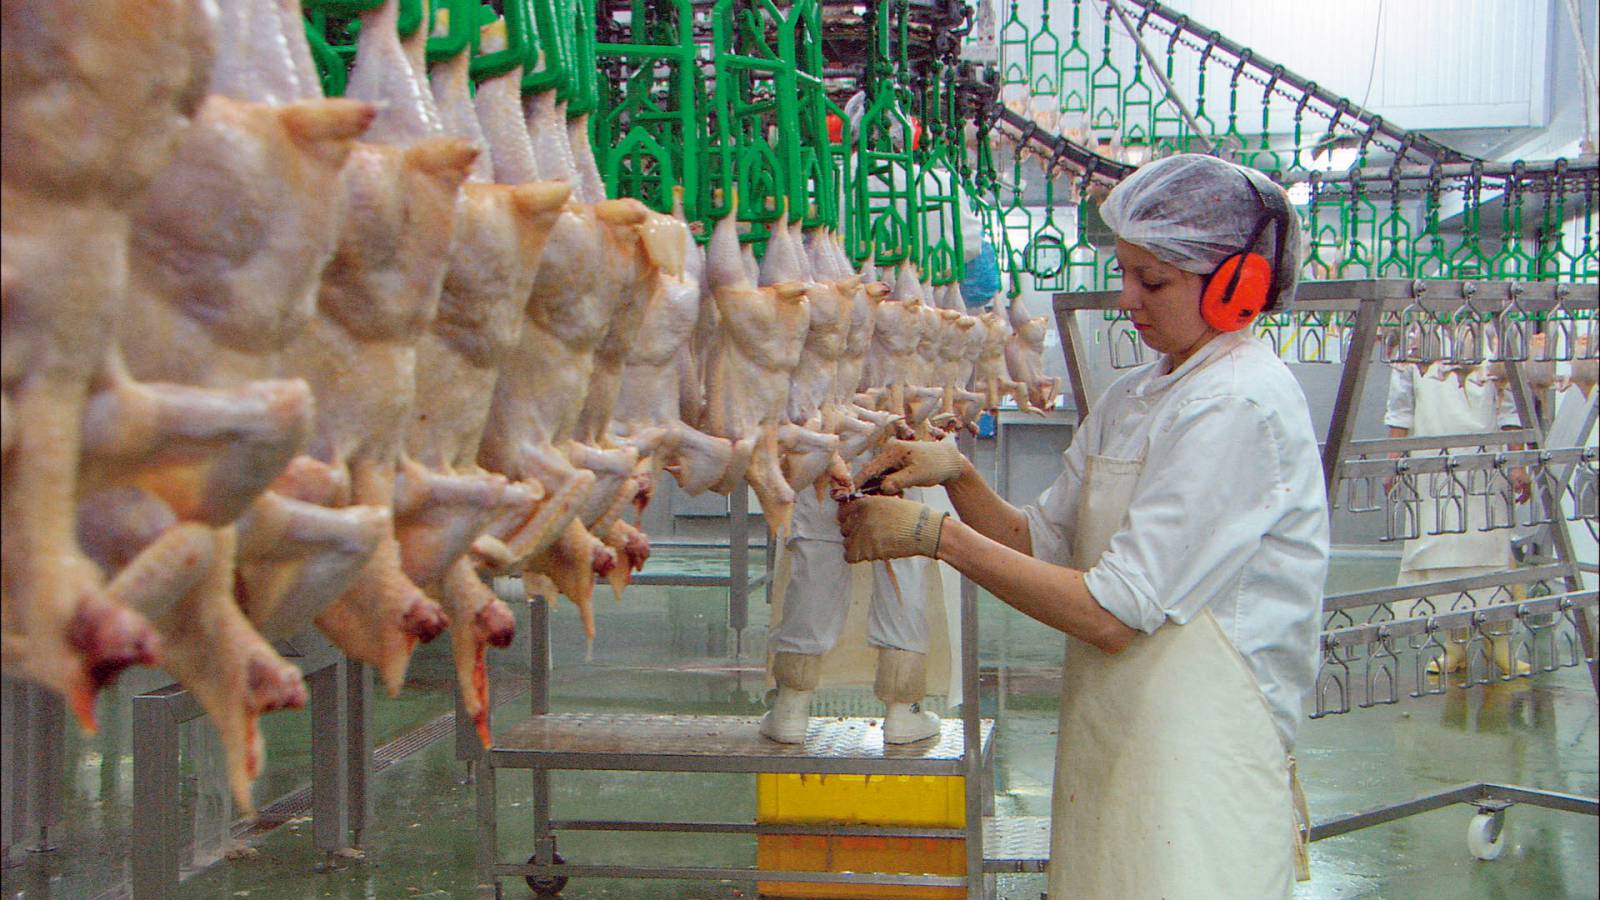 Dead and plucked chickens hanging by there feet from a green rack as a woman earring a hairnet and headphones processes one. 